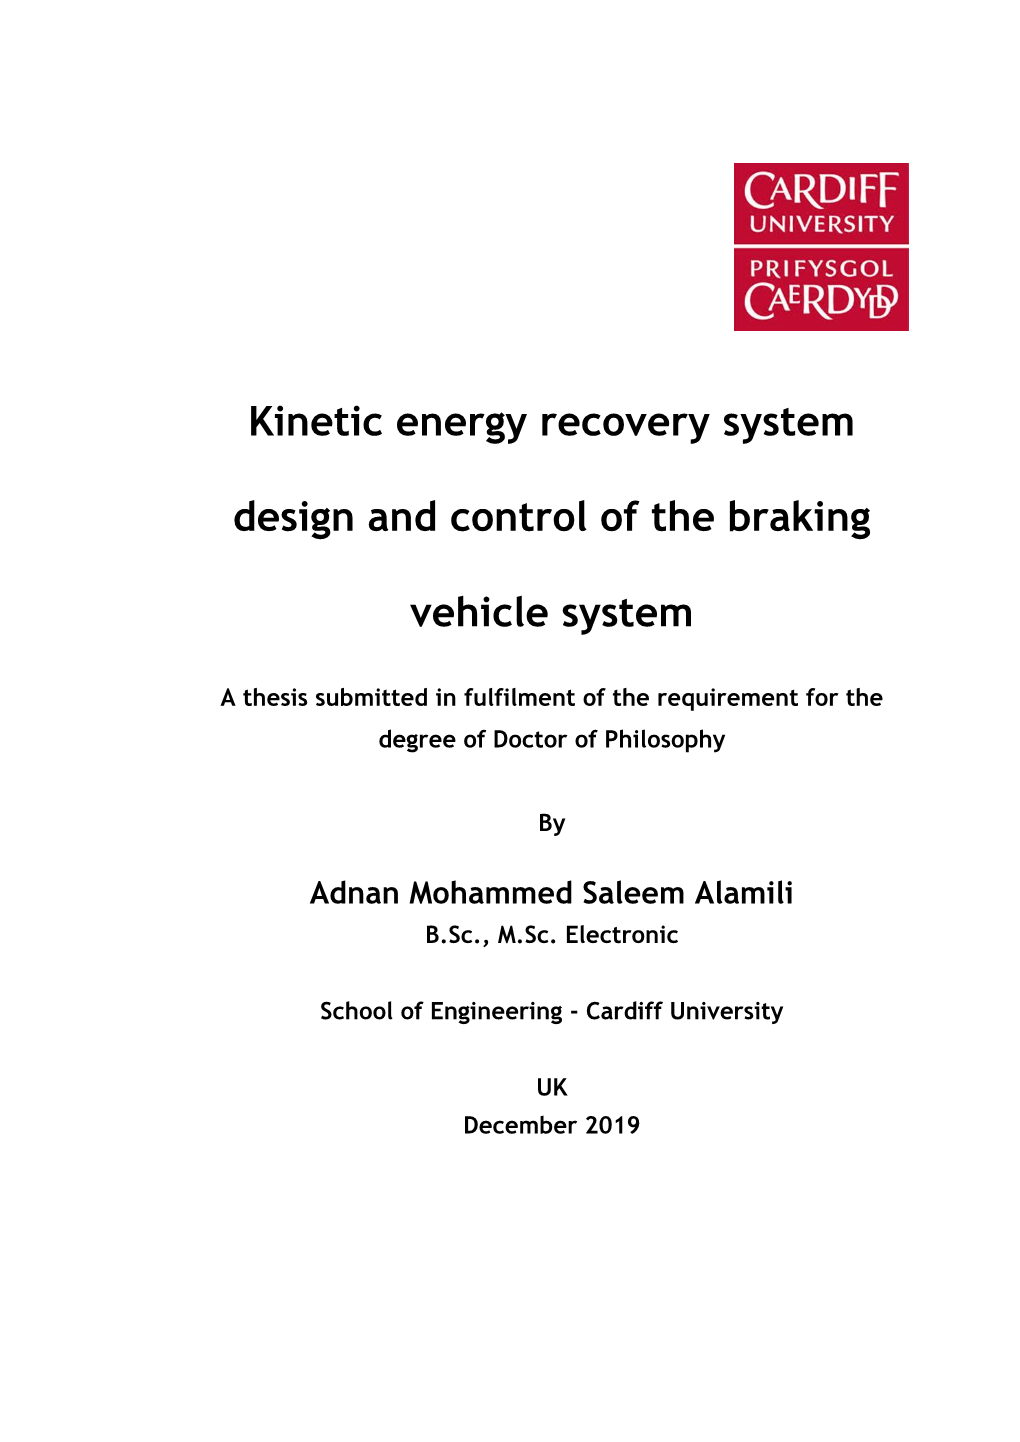 Kinetic Energy Recovery System Design and Control of the Braking Vehicle